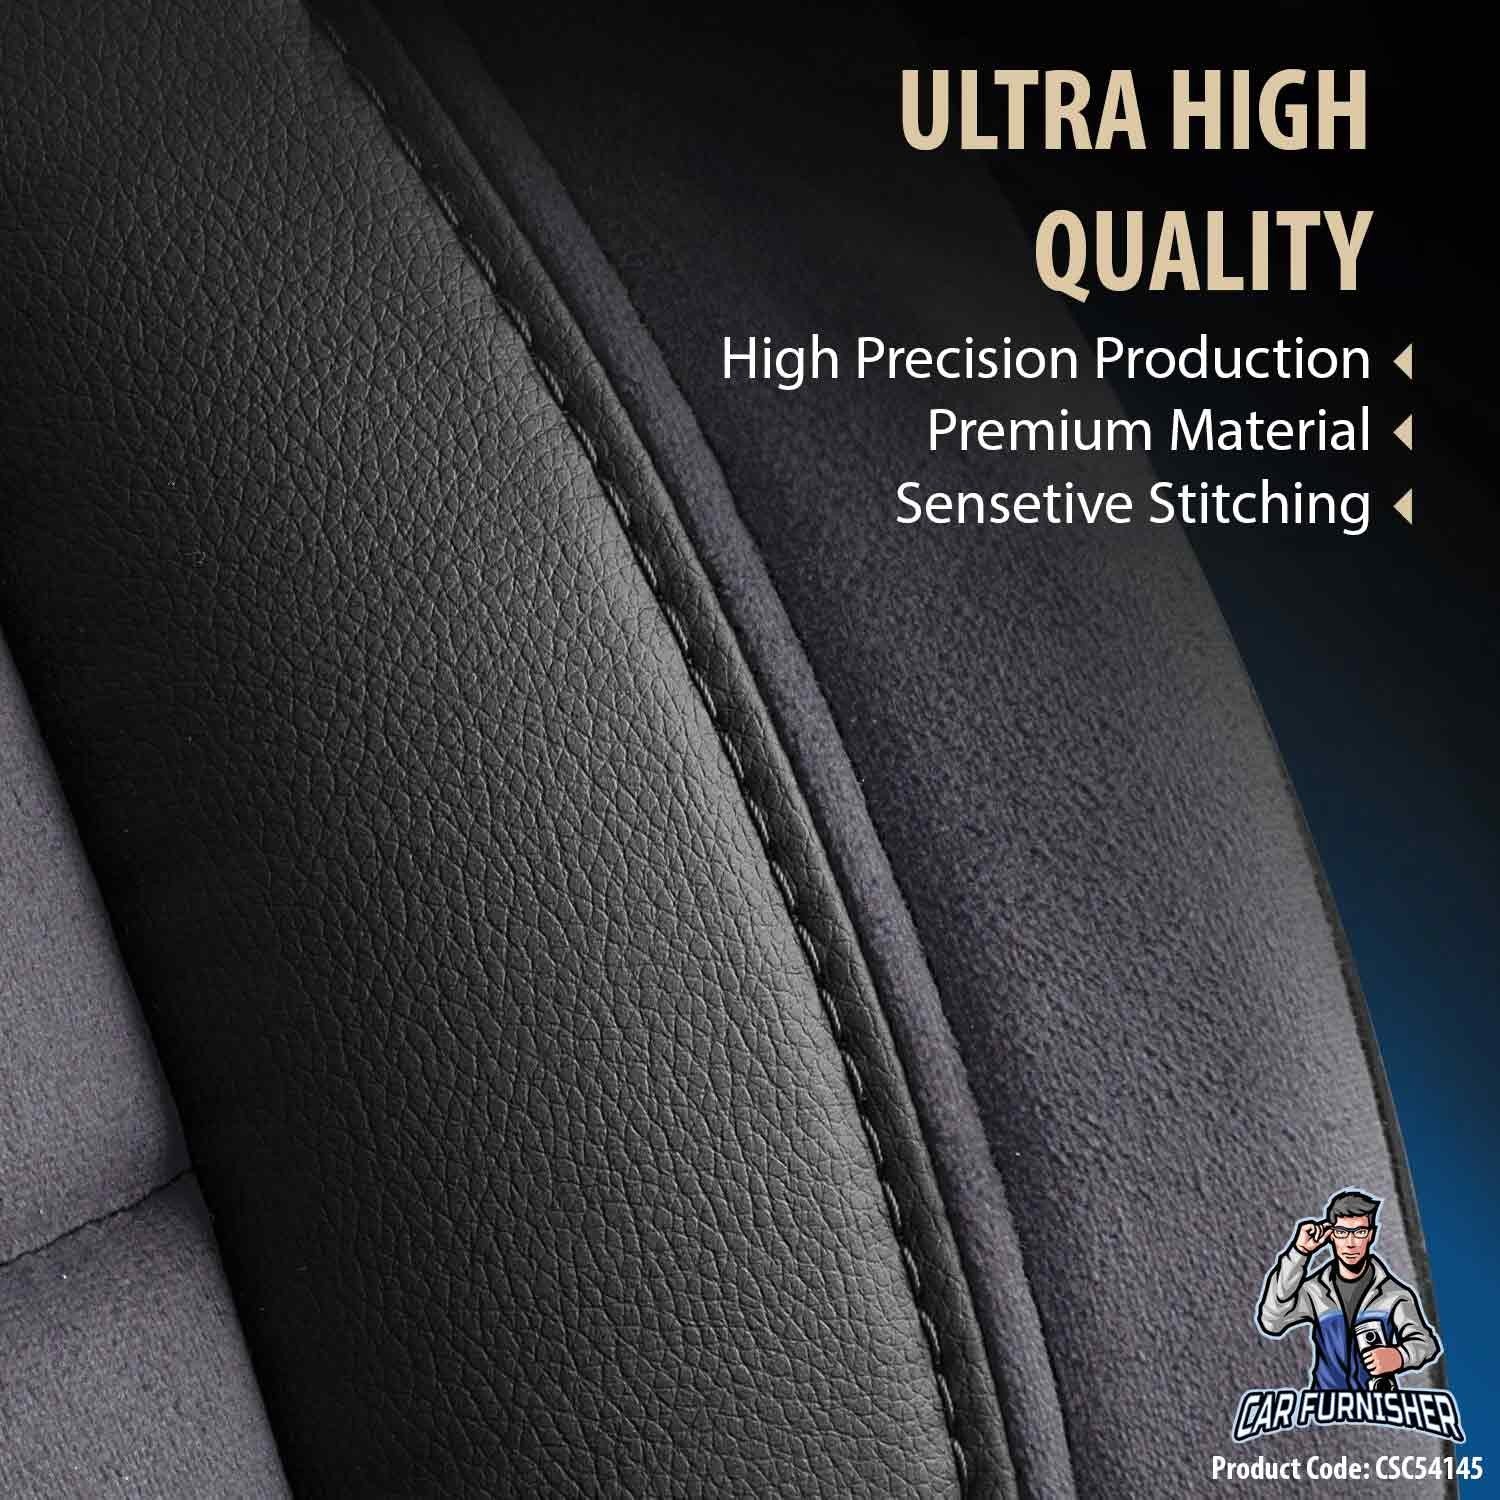 Mercedes 190 Seat Covers Toronto Design Smoked Black 5 Seats + Headrests (Full Set) Leather & Suede Fabric